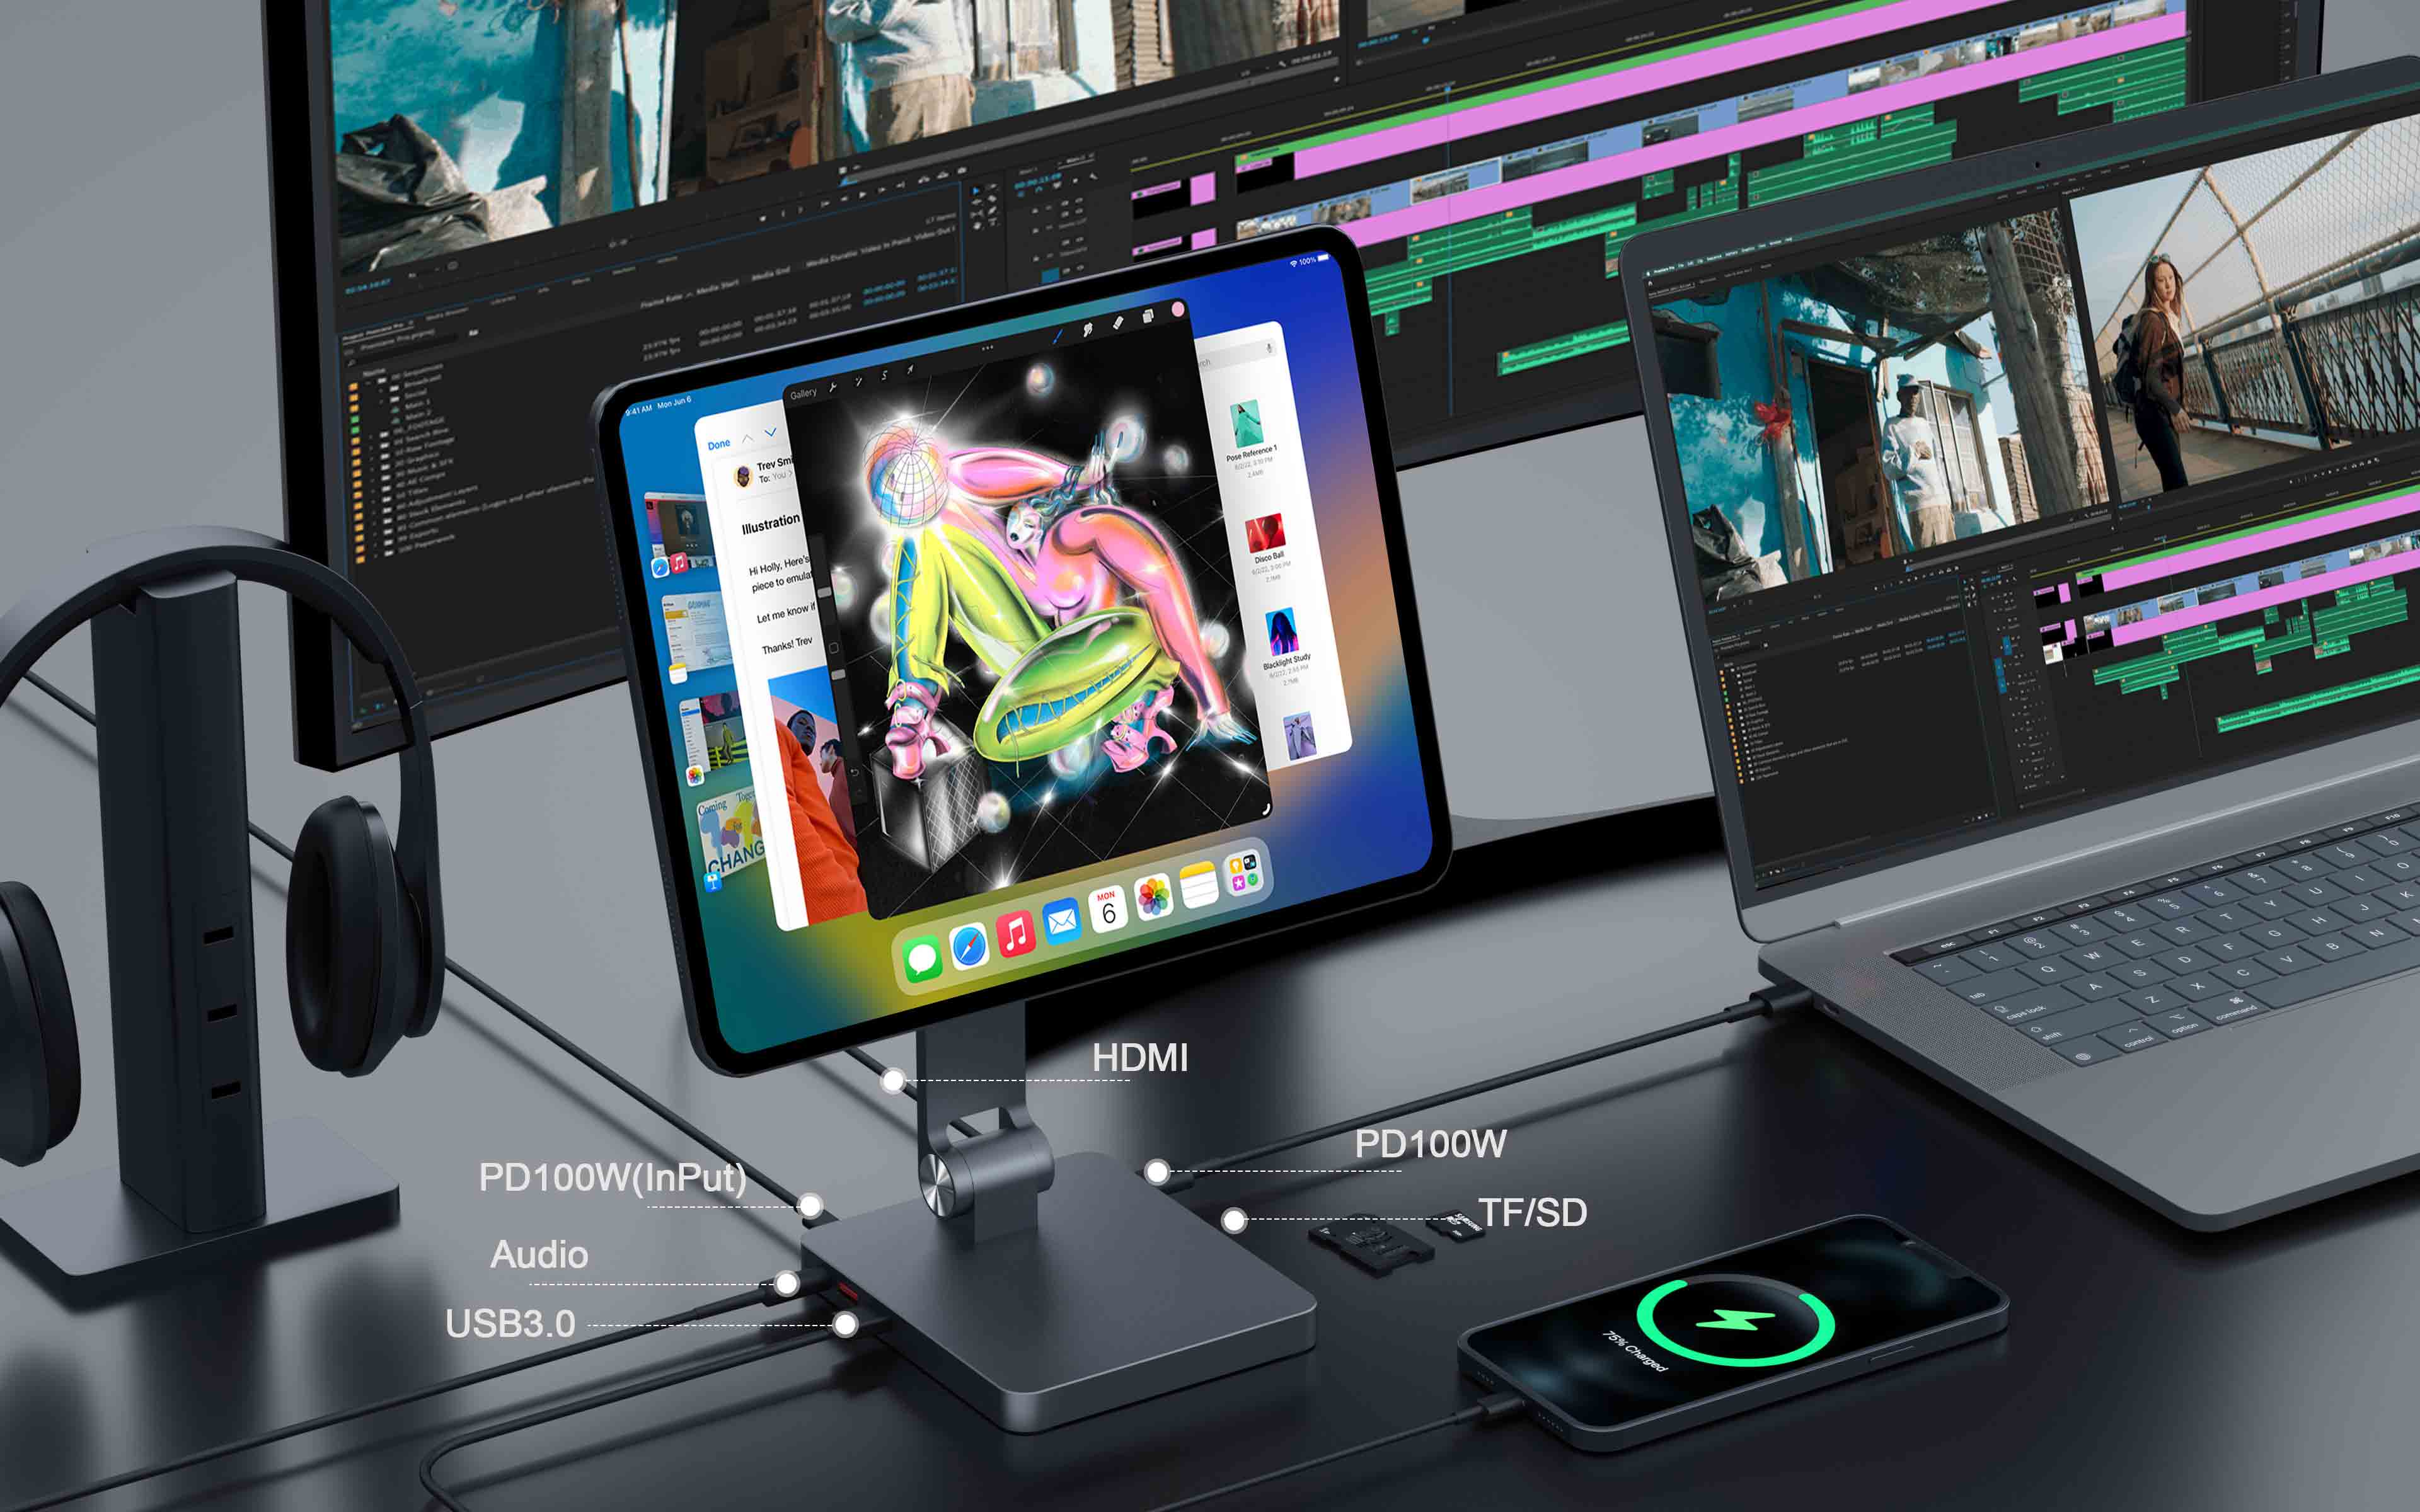 ipad-dock-stand-hub-powerful-features-make-it-to-do-to-do-video-editing-photo-manipulation-and-more